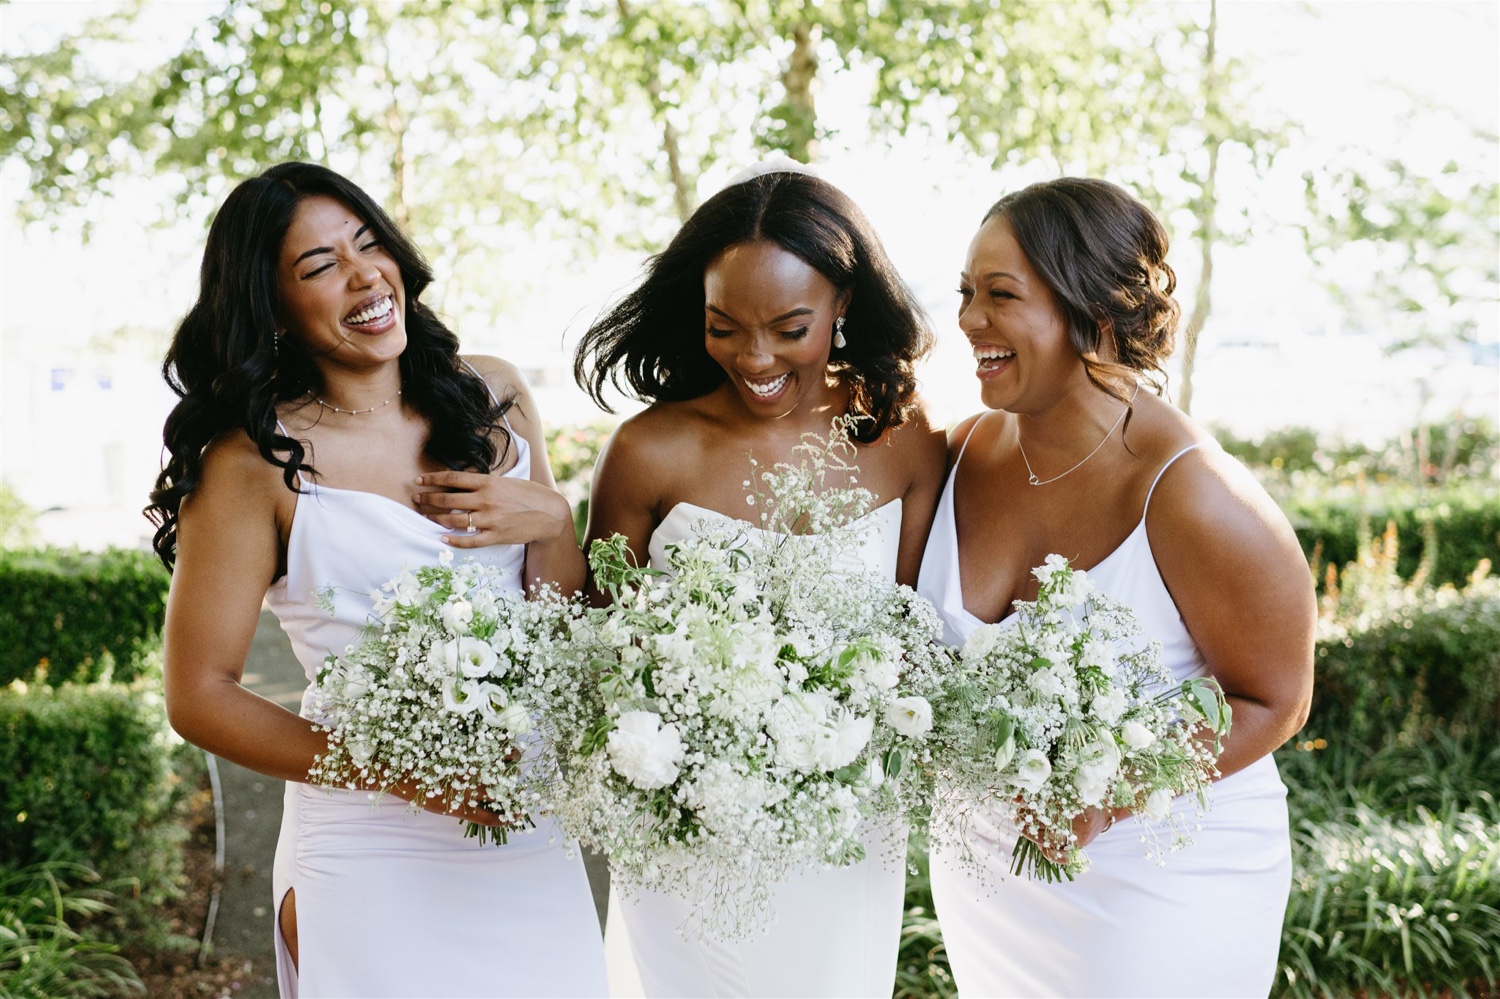 sisters of the bride and bride white bridesmaids gown